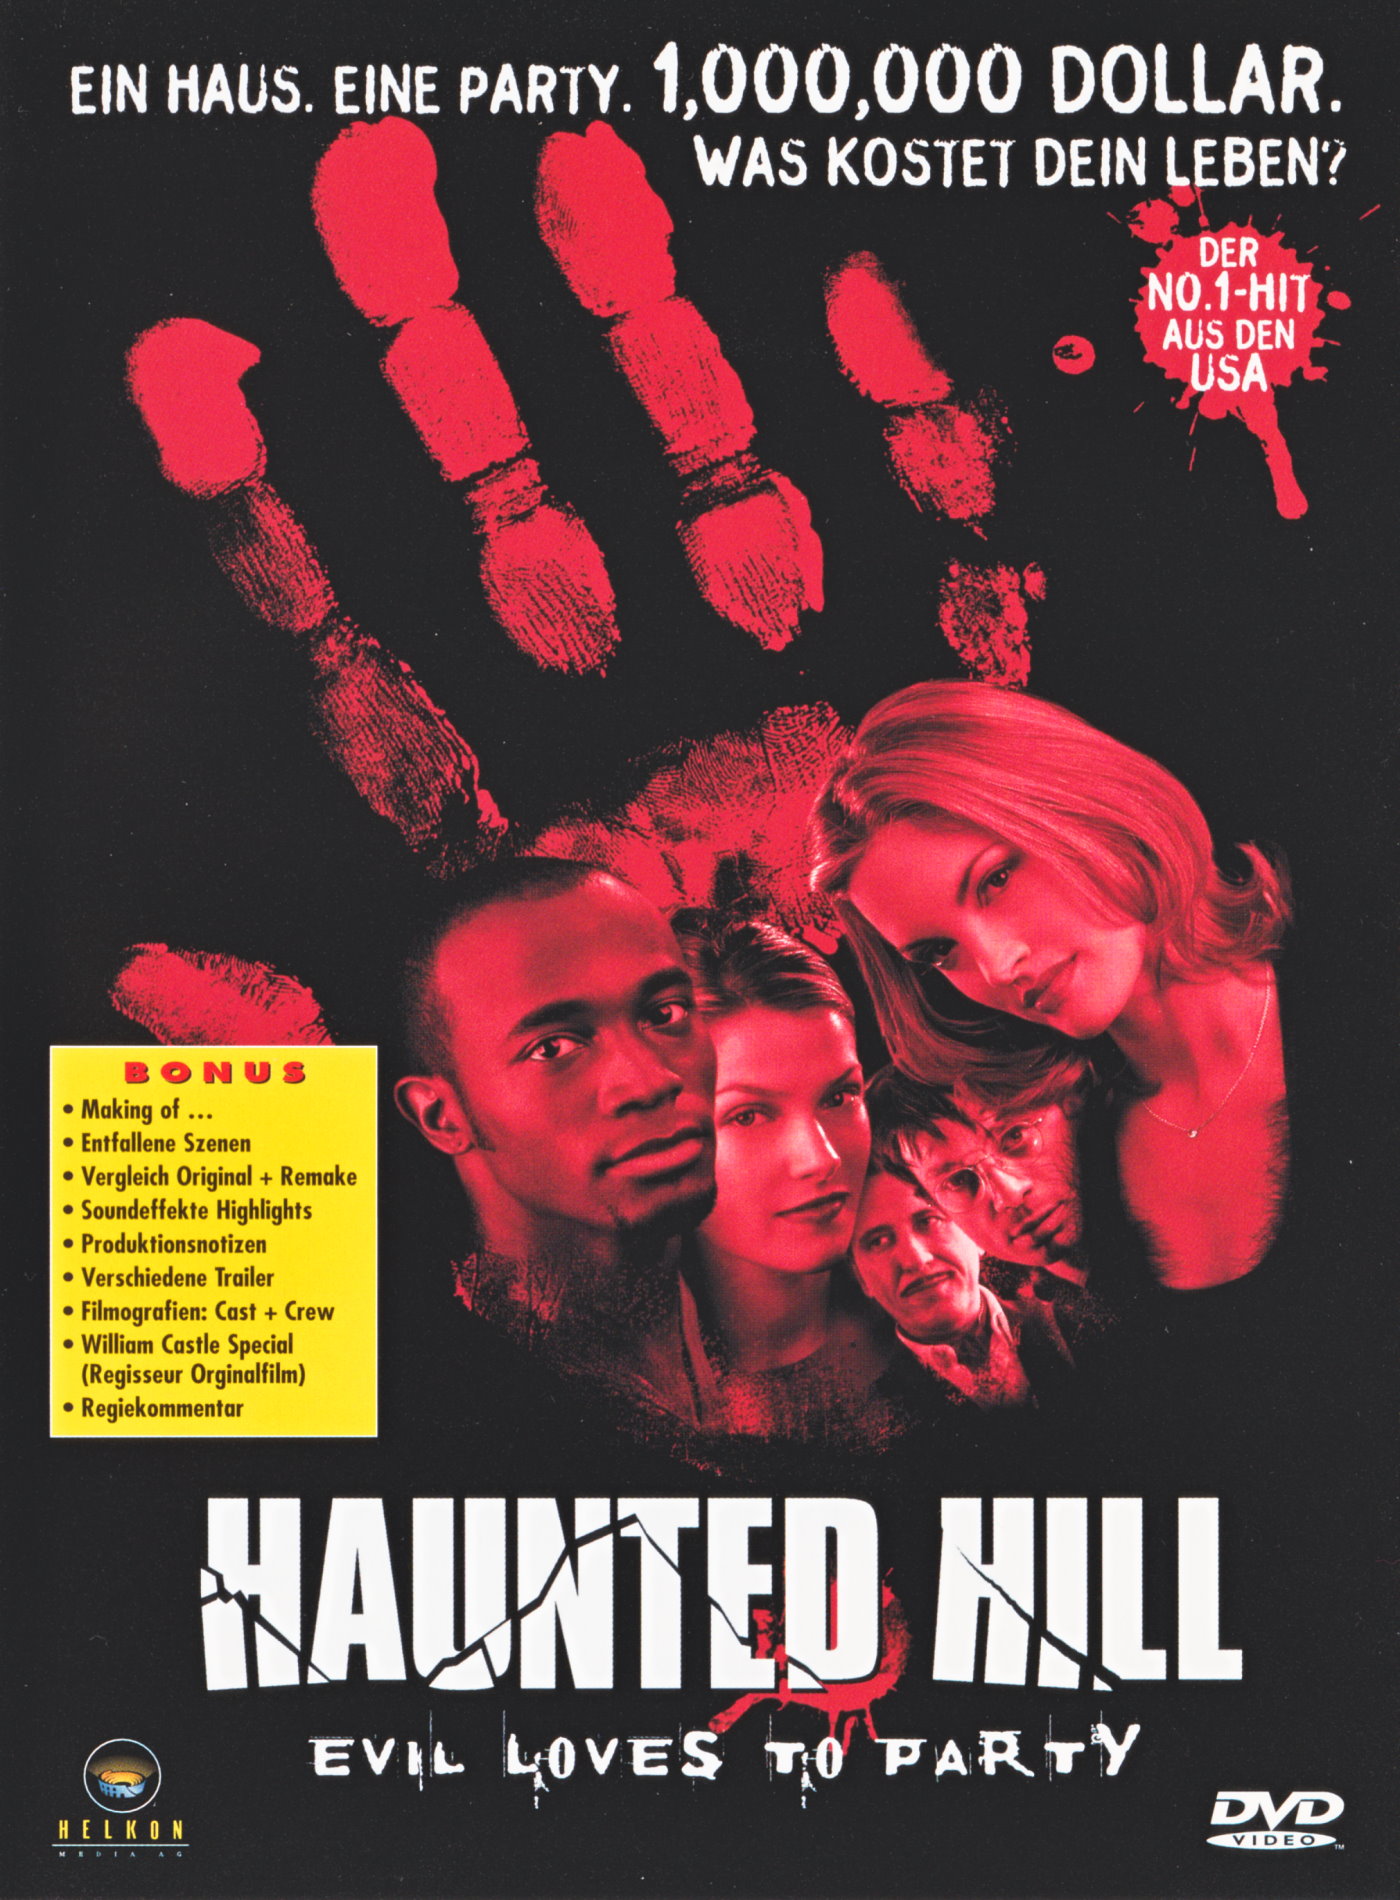 Cover - Haunted Hill - Evil Loves to Party.jpg